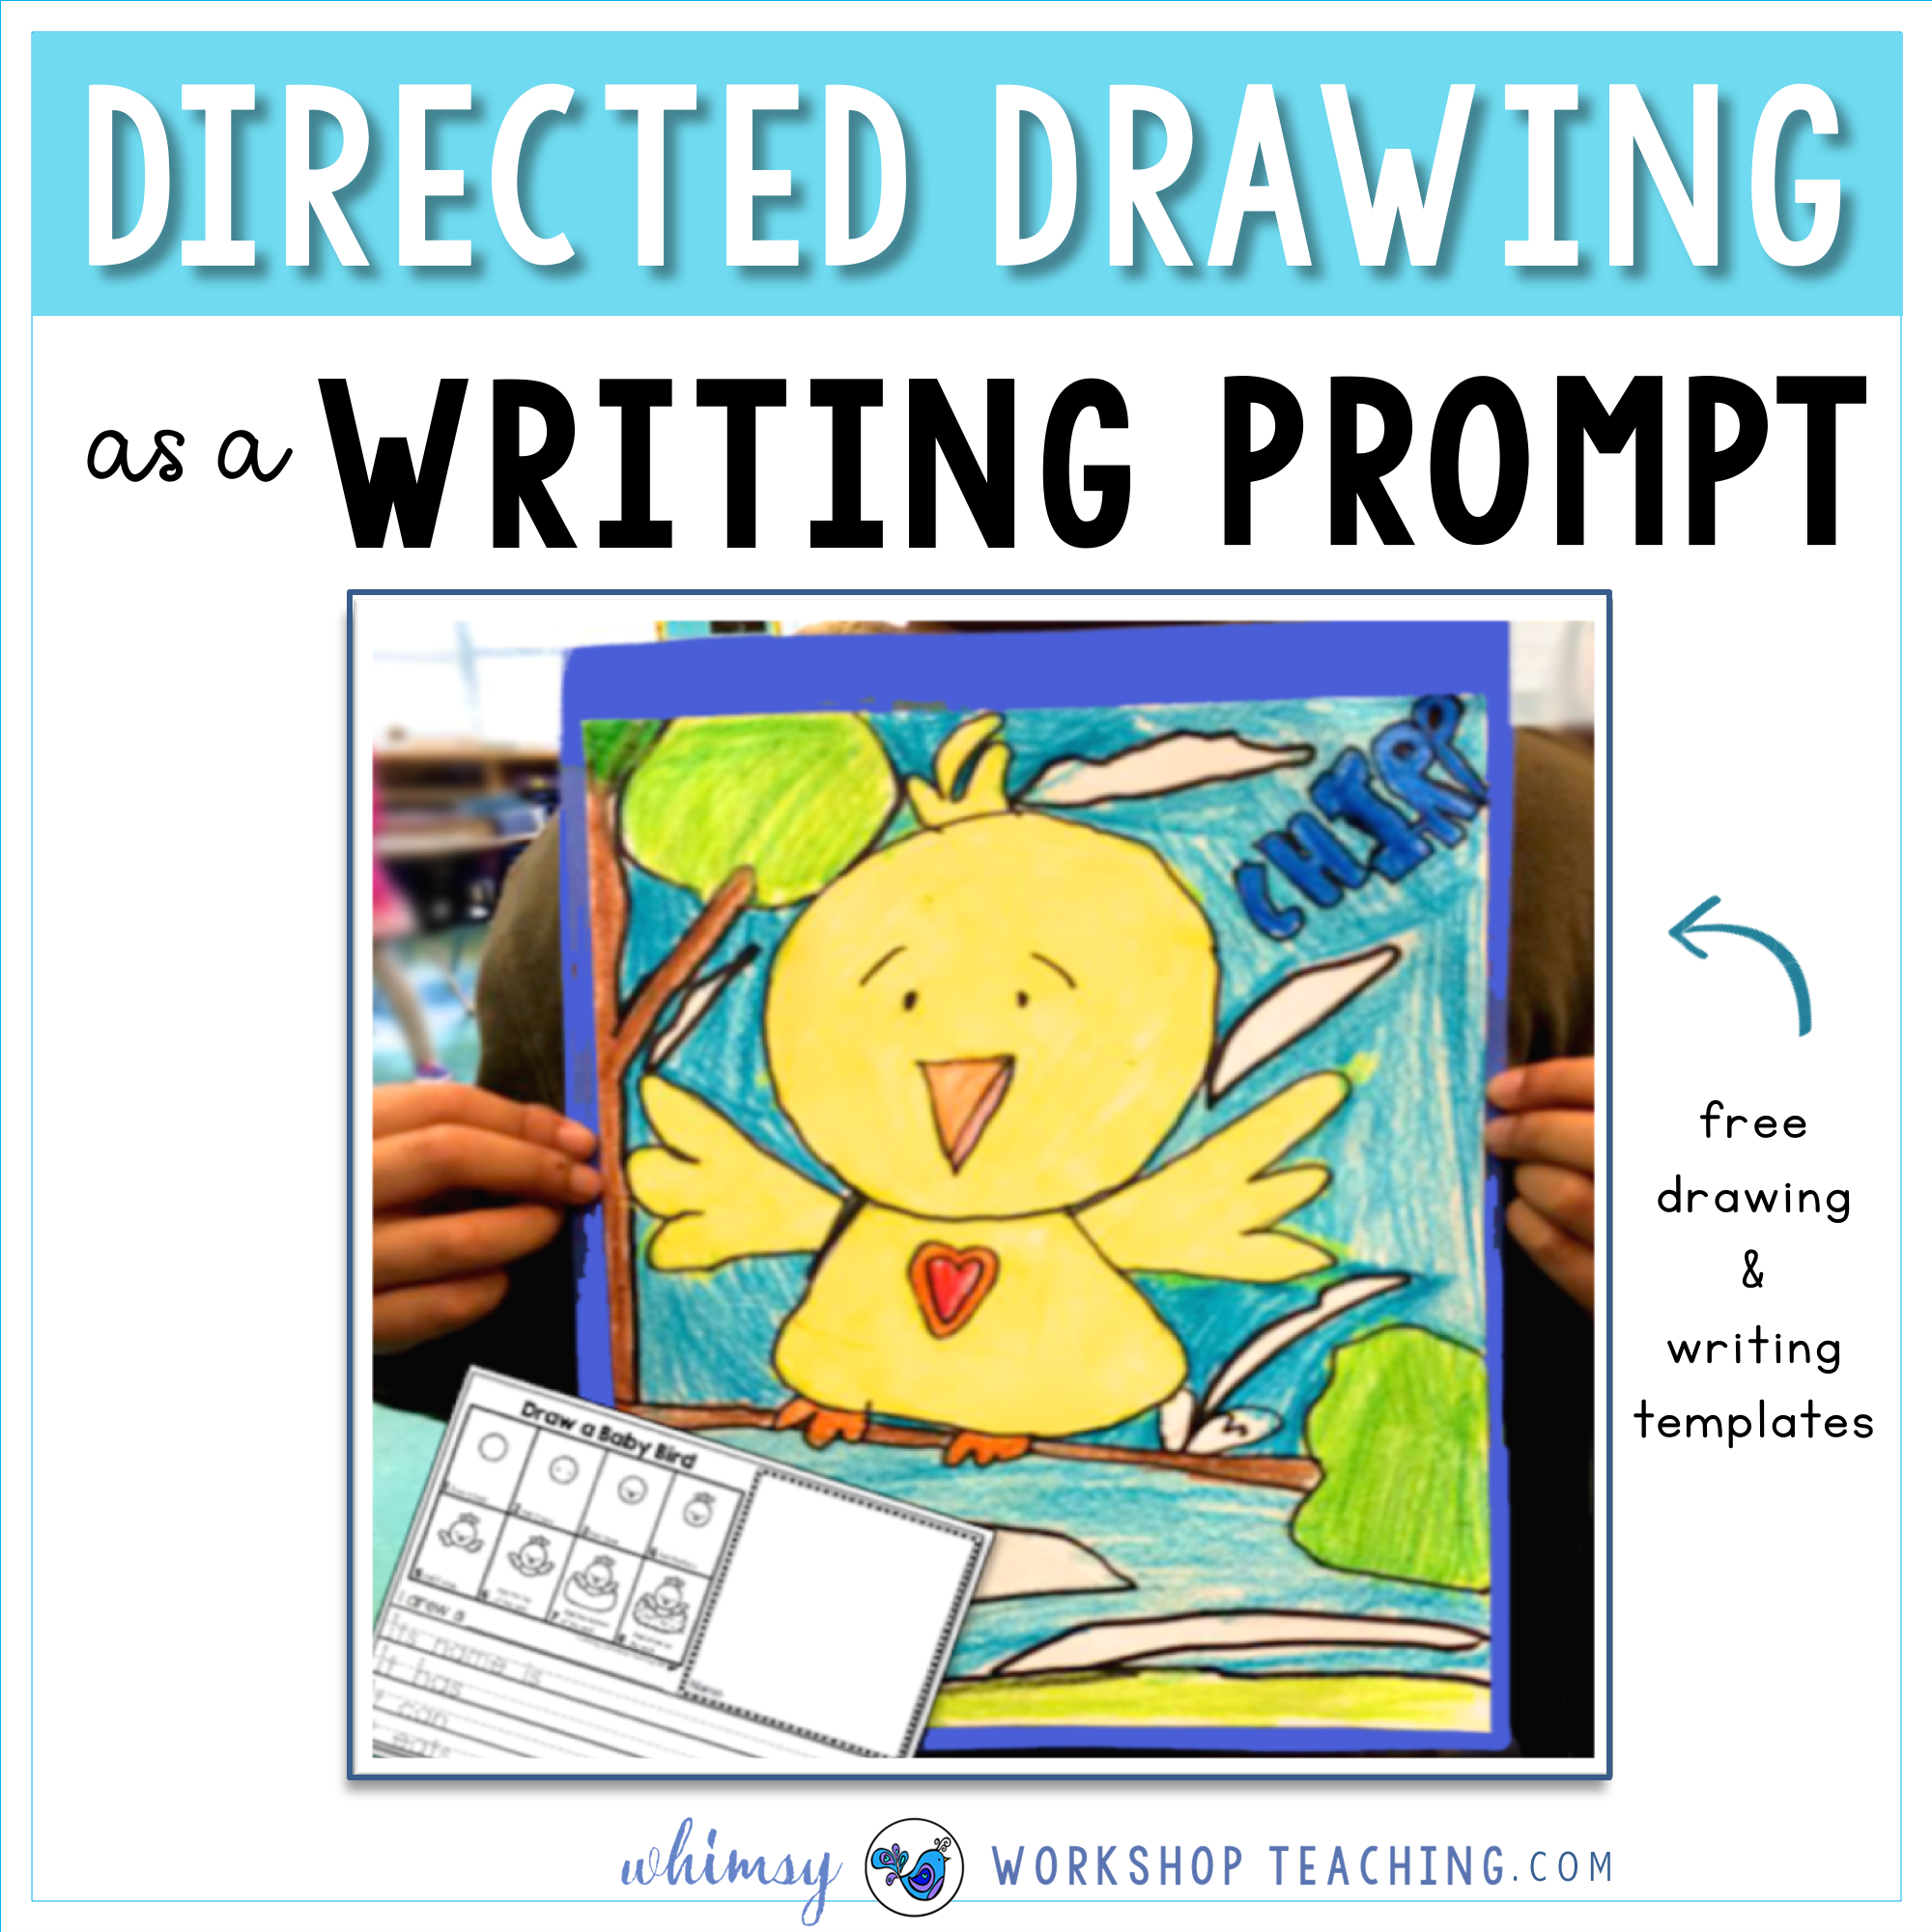 Directed drawing as a writing prompt